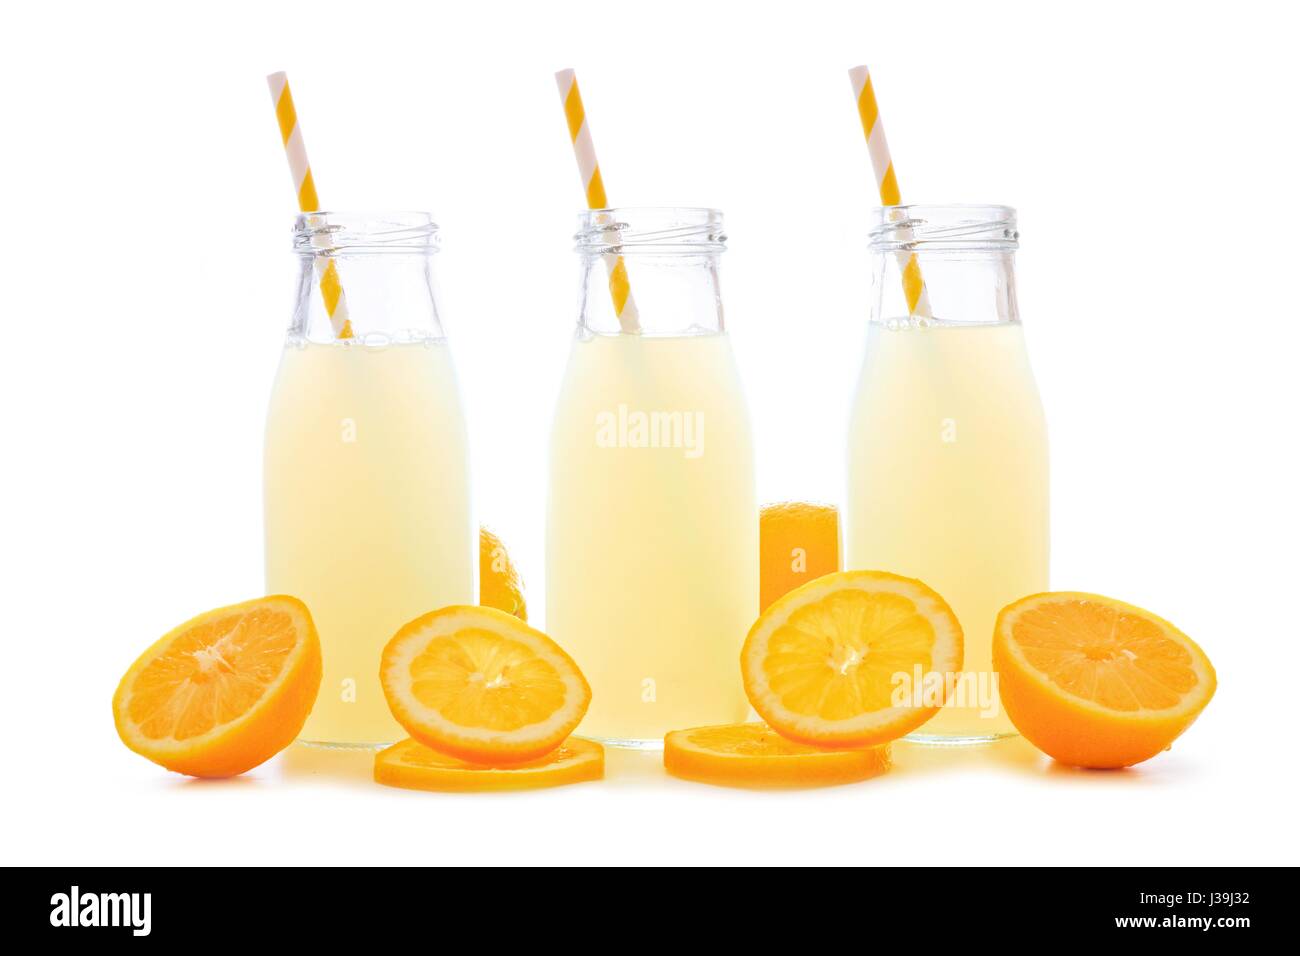 Three bottles of cold lemonade with lemon slices and straws isolated on a white background Stock Photo